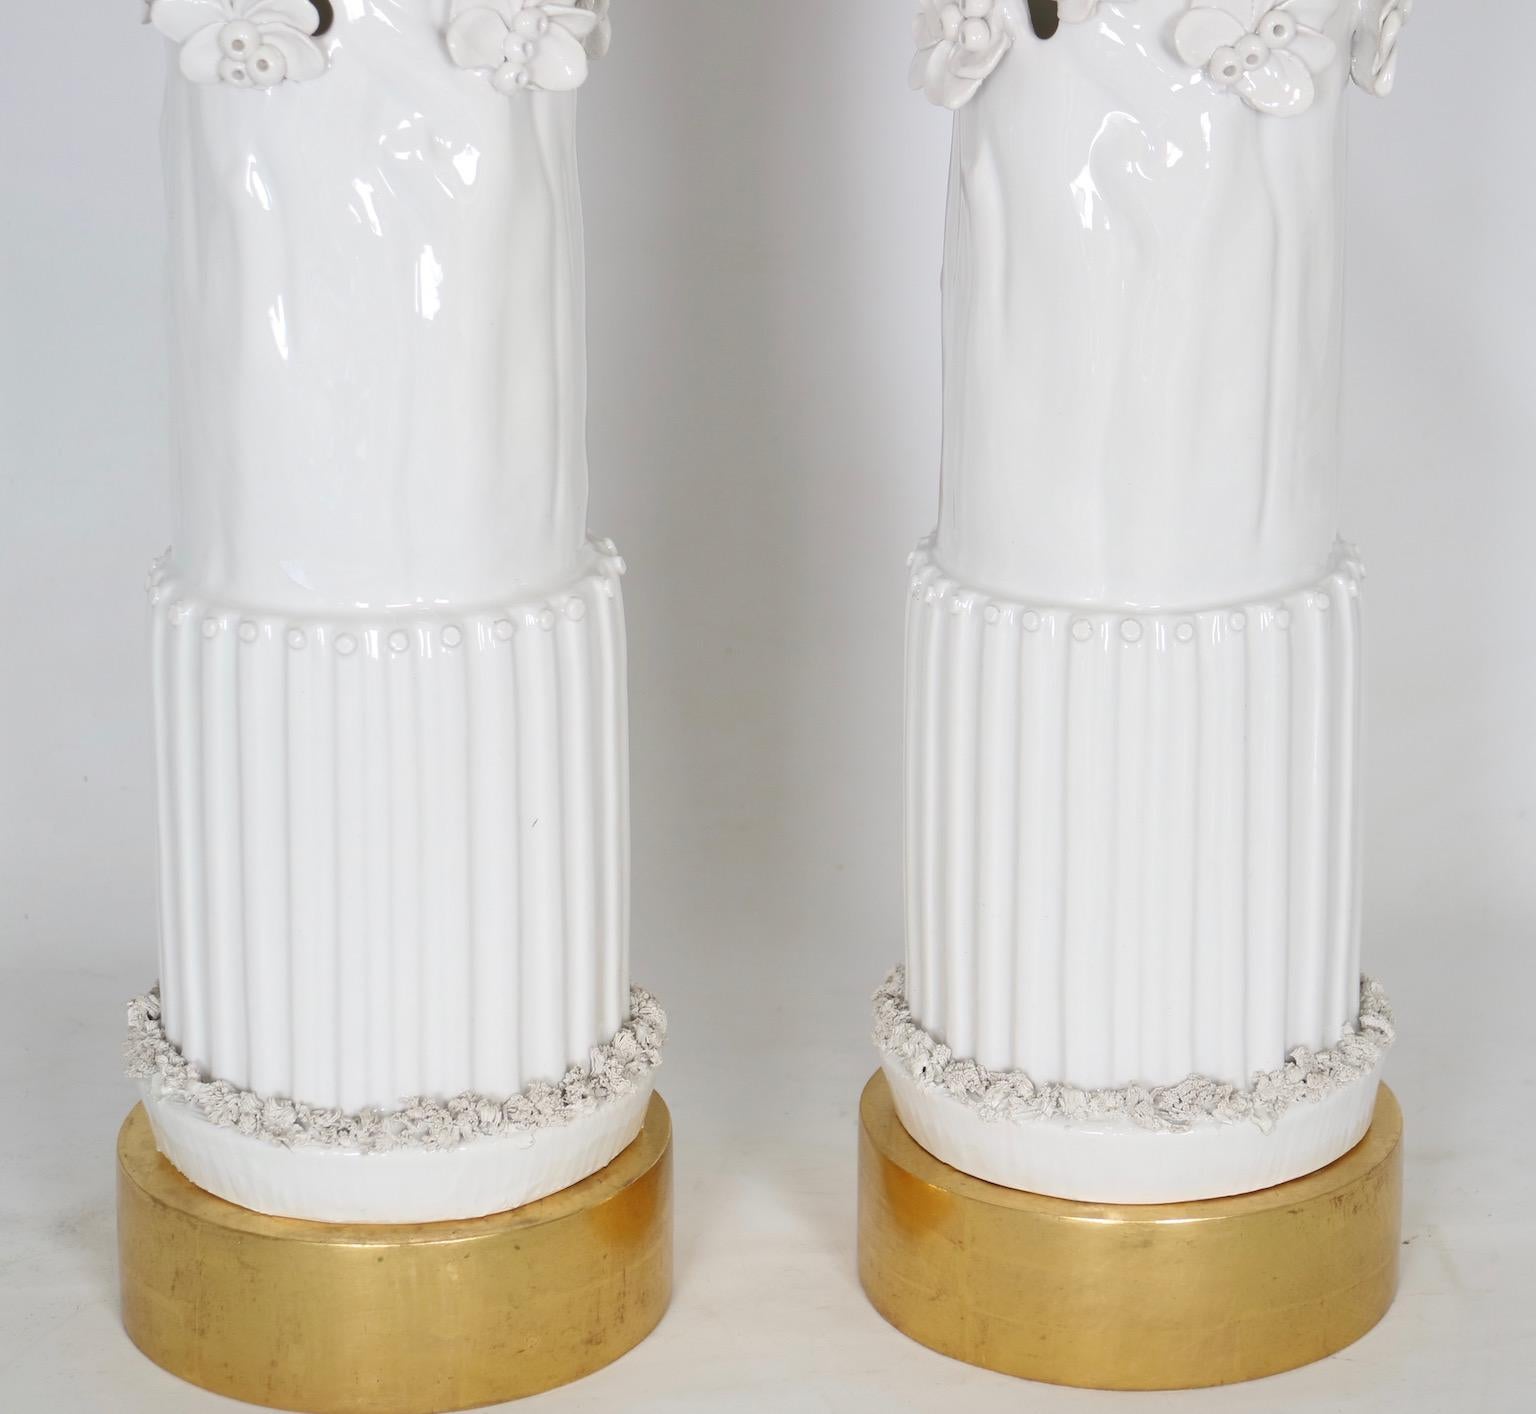 Mid-20th Century Marbro Lamp Co. Hollywood Regency White Ceramic Lamps with Sculptural Flowers